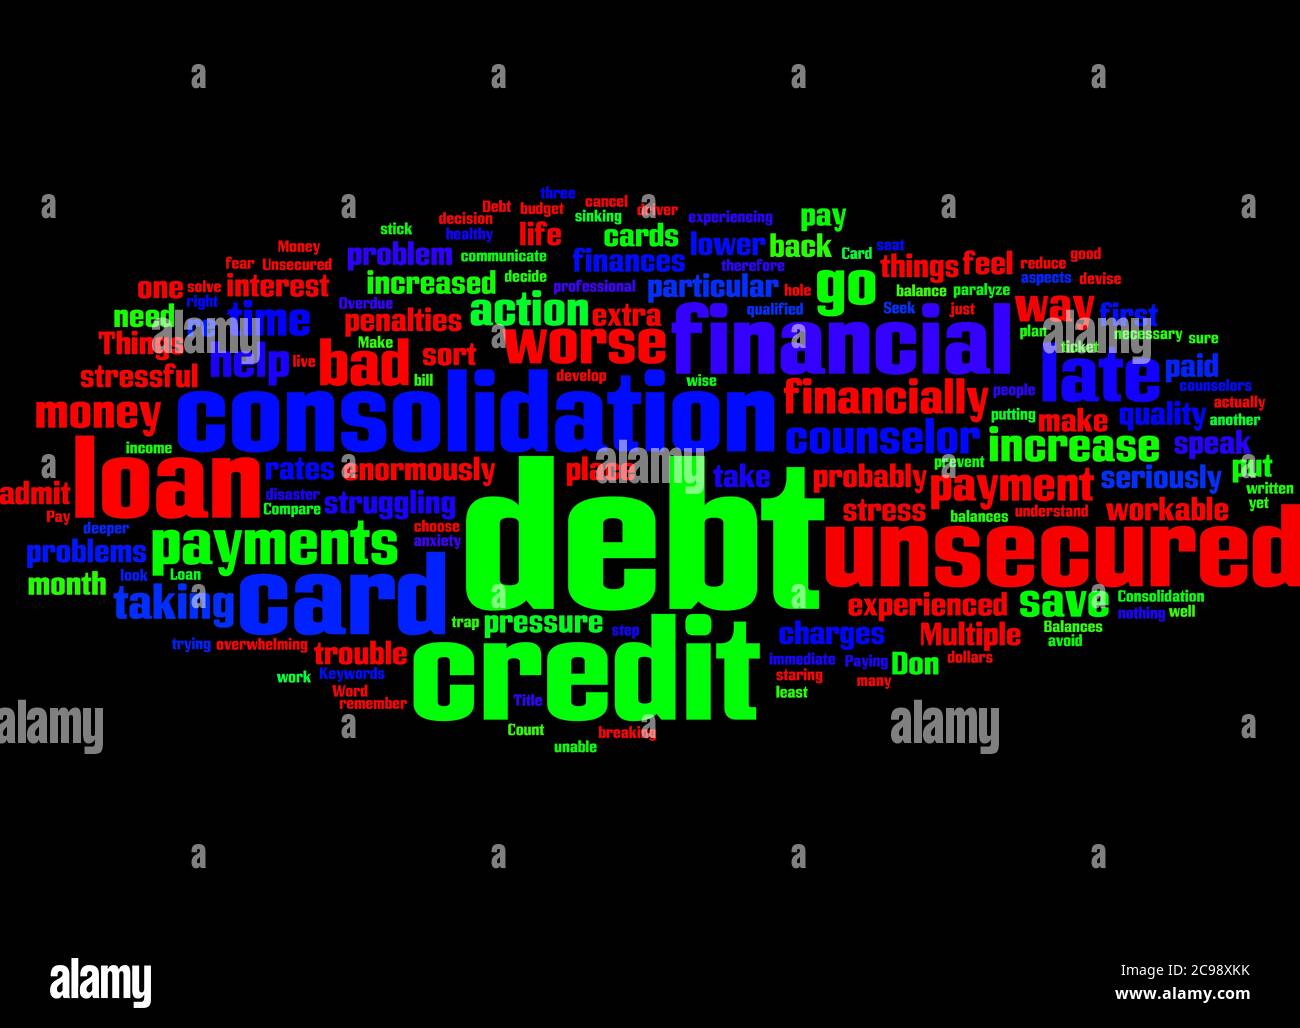 Word Cloud Summary Of Article Unsecured Debt Consolidation Loan Pay Off Overdue Credit Card Balances And Save Money Stock Photo Alamy